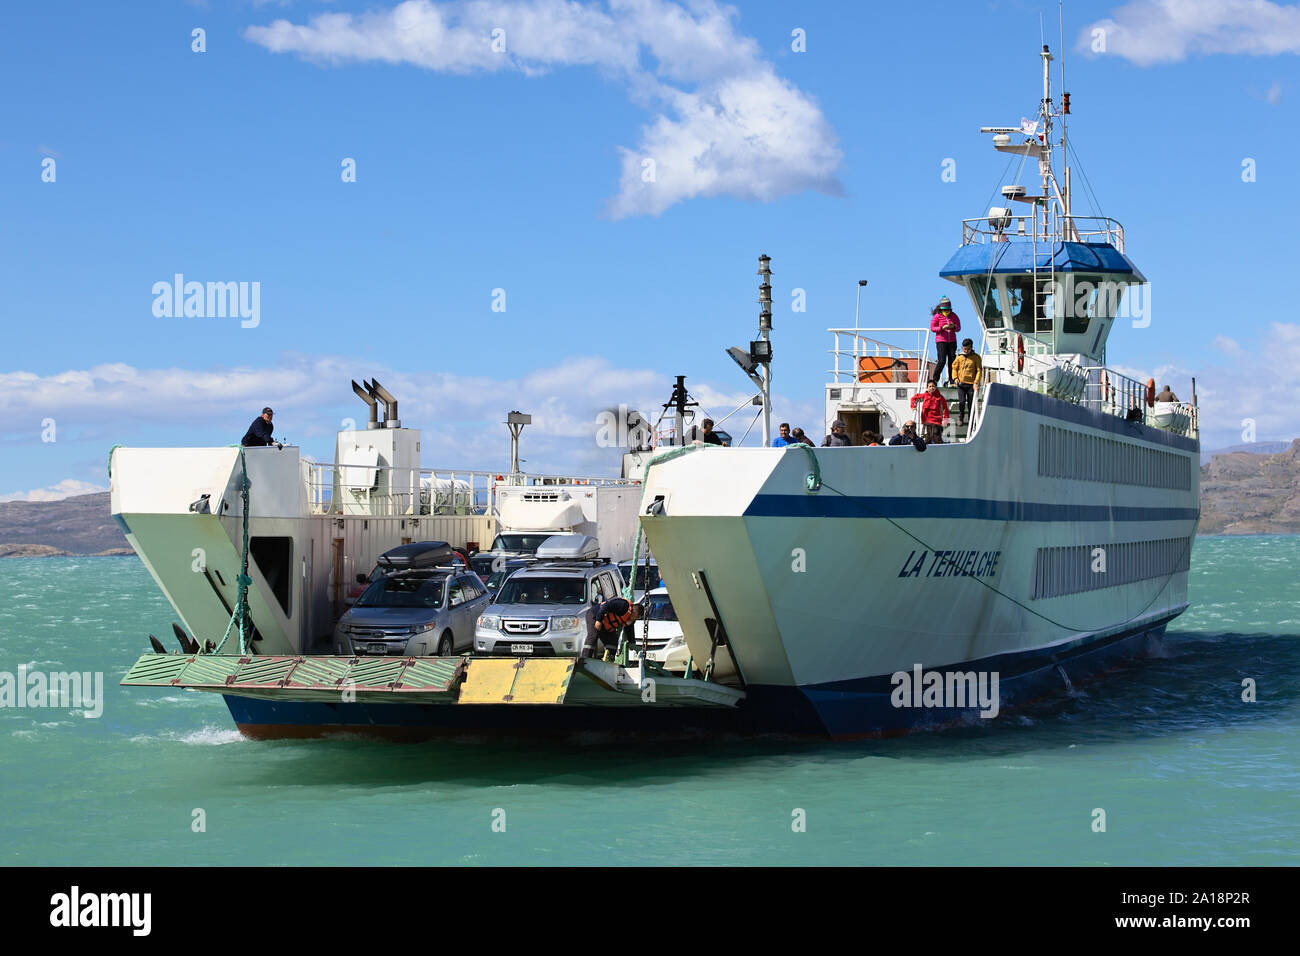 PUERTO IBANEZ, CHILE - FEBRUARY 20, 2016: Ferry arriving from Chile Chico in Puerto Ibanez on the Northern shore of Lago General Carrera lake Stock Photo